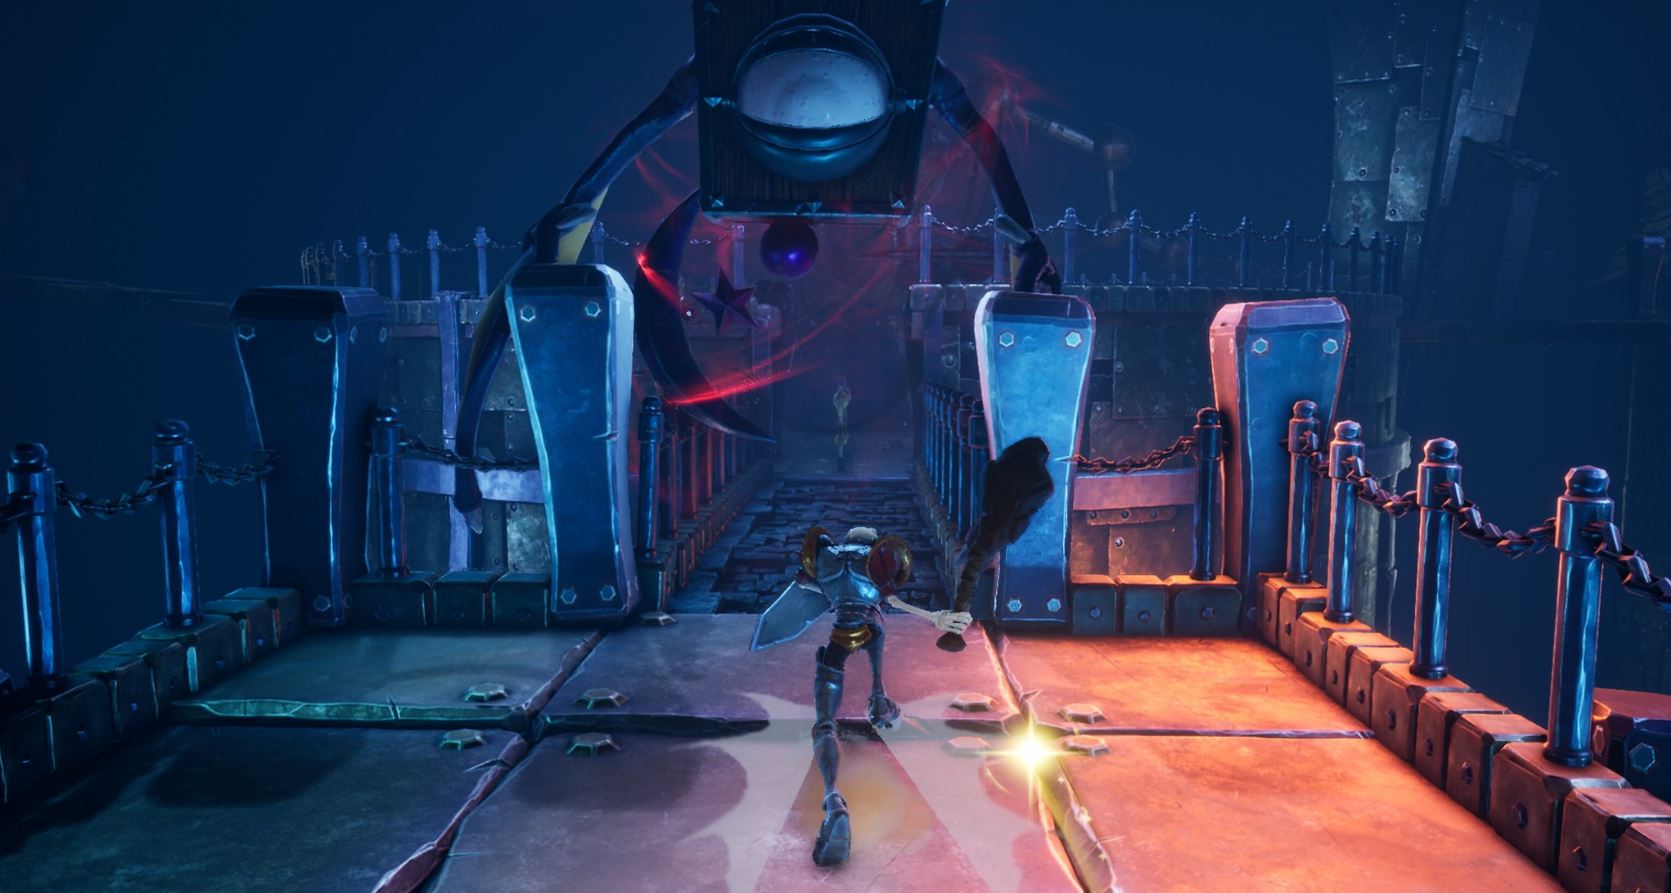 Get A Behind The Scenes Look At The Medievil Ps4 Remake Images, Photos, Reviews